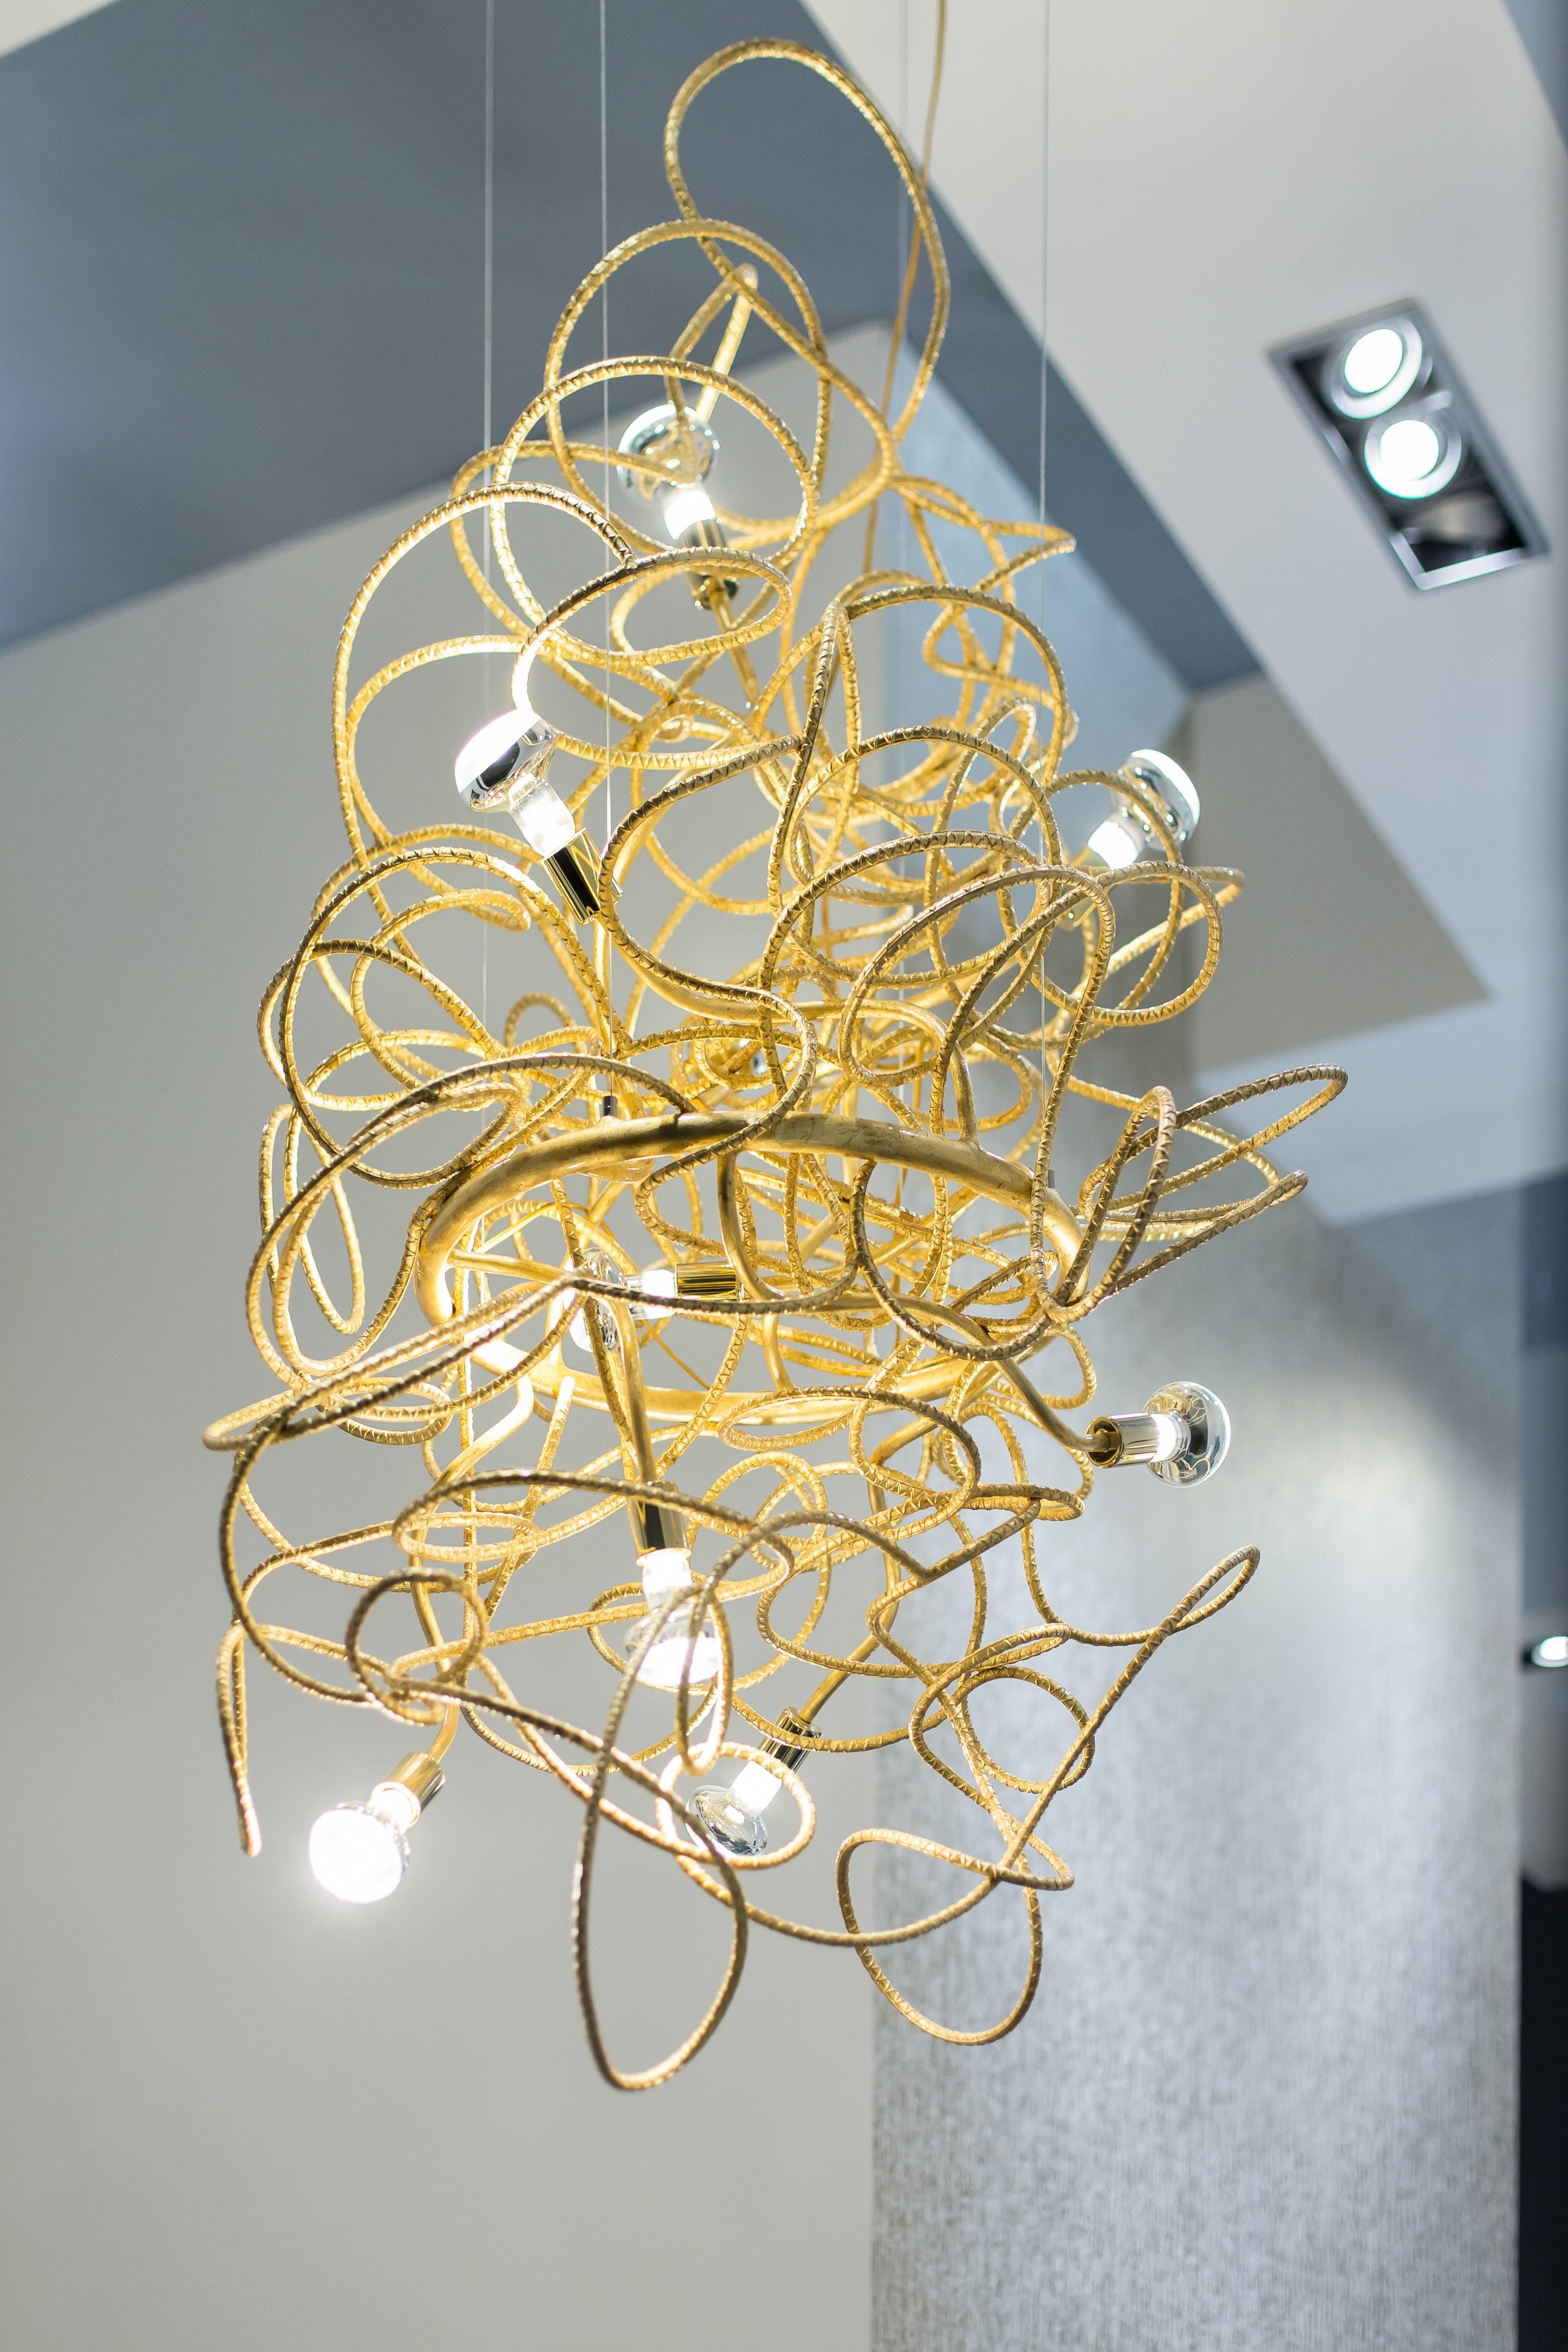 DAX VERTICAL CHANDELIER - Modern Gold Leafed Sculptural Rebar Lighting Design

The Dax chandelier is a stunning work of art that is sure to elevate the style of any room. Handcrafted in California, this chandelier features gold leafed rebar that has